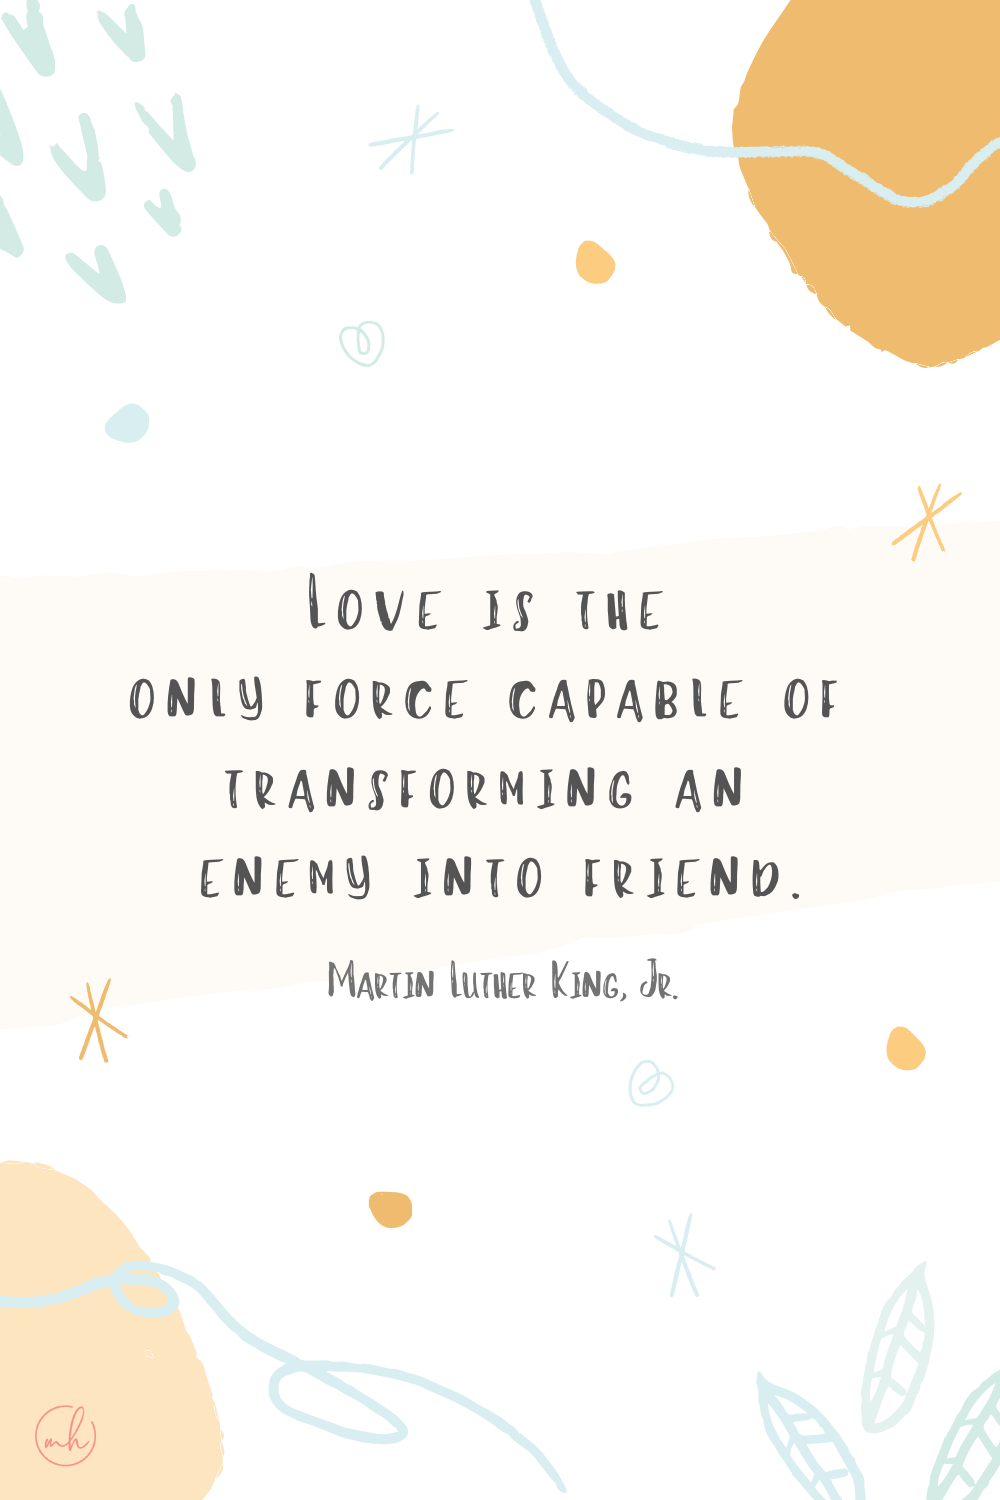 "Love is the only force capable of transforming an enemy into friend." - Martin Luther King, Jr.